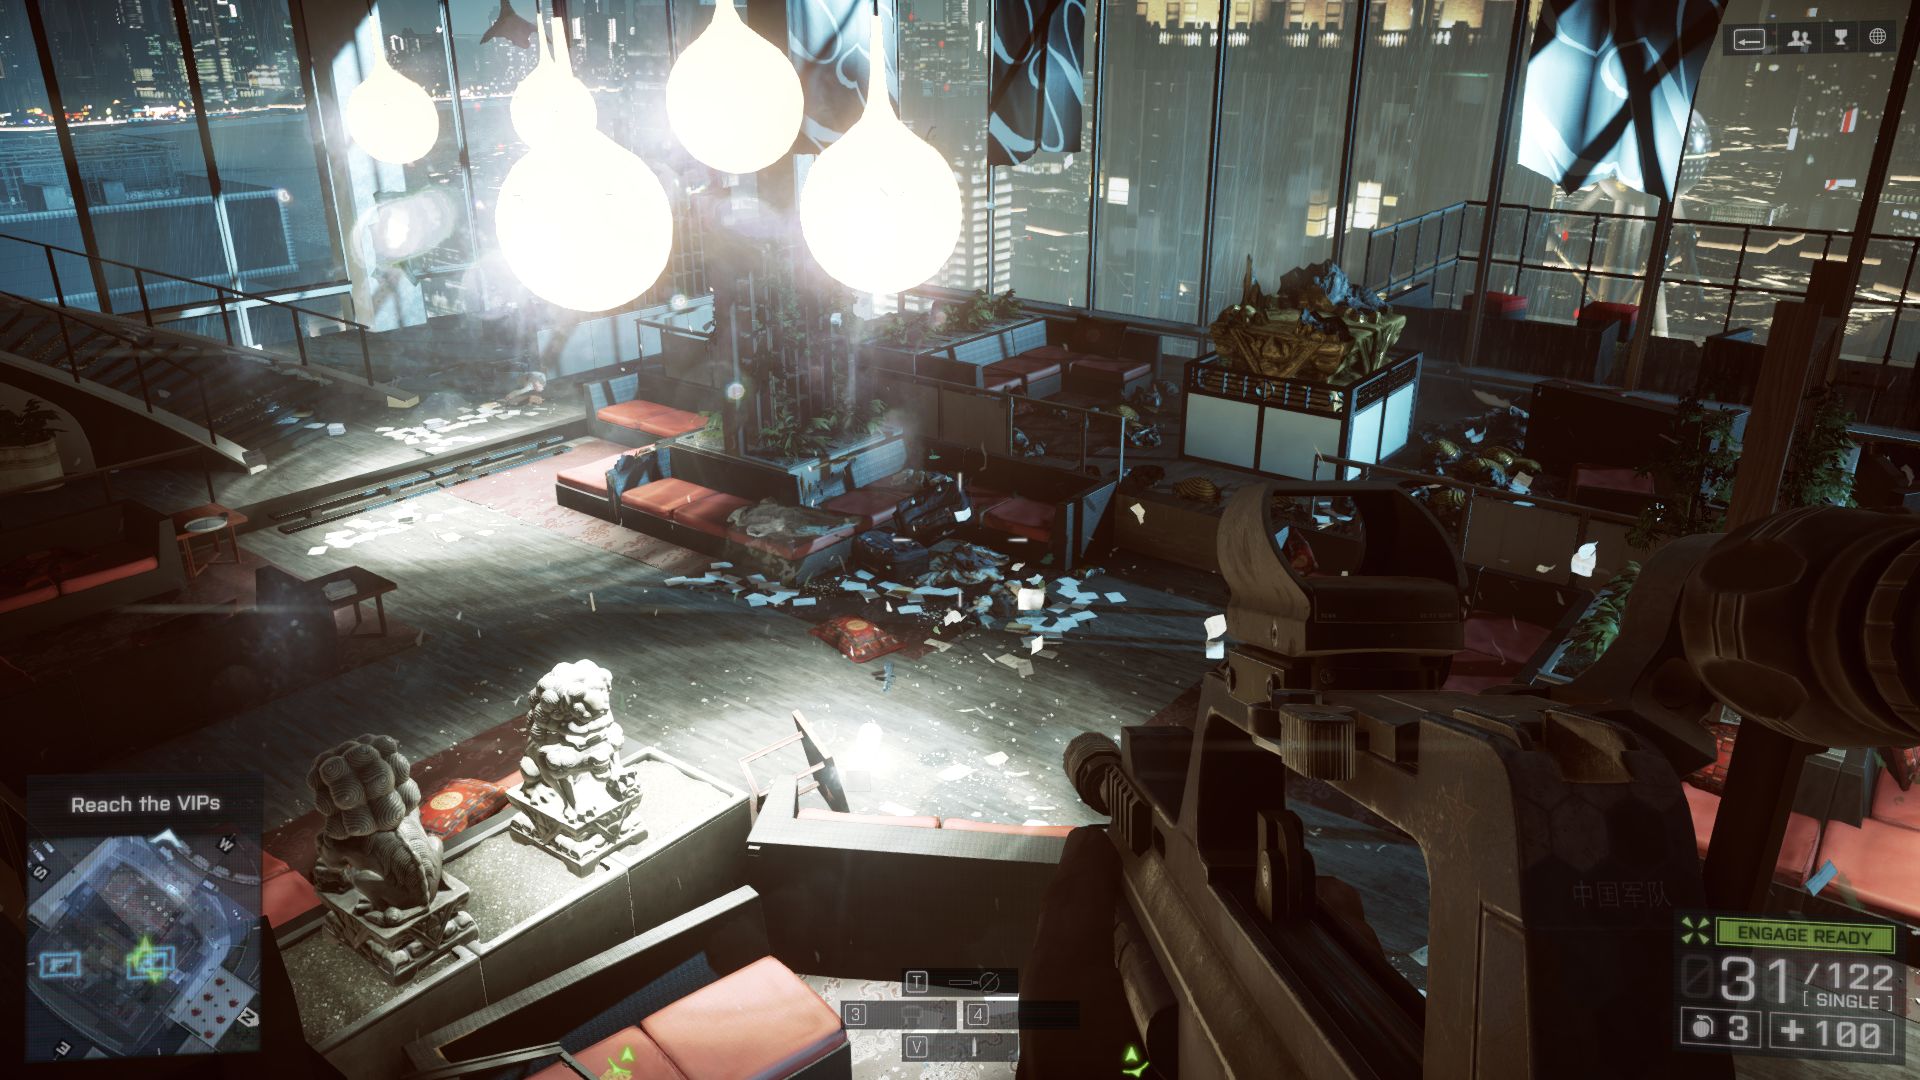 Battlefield 4 System Requirements - Can I Run It? - PCGameBenchmark